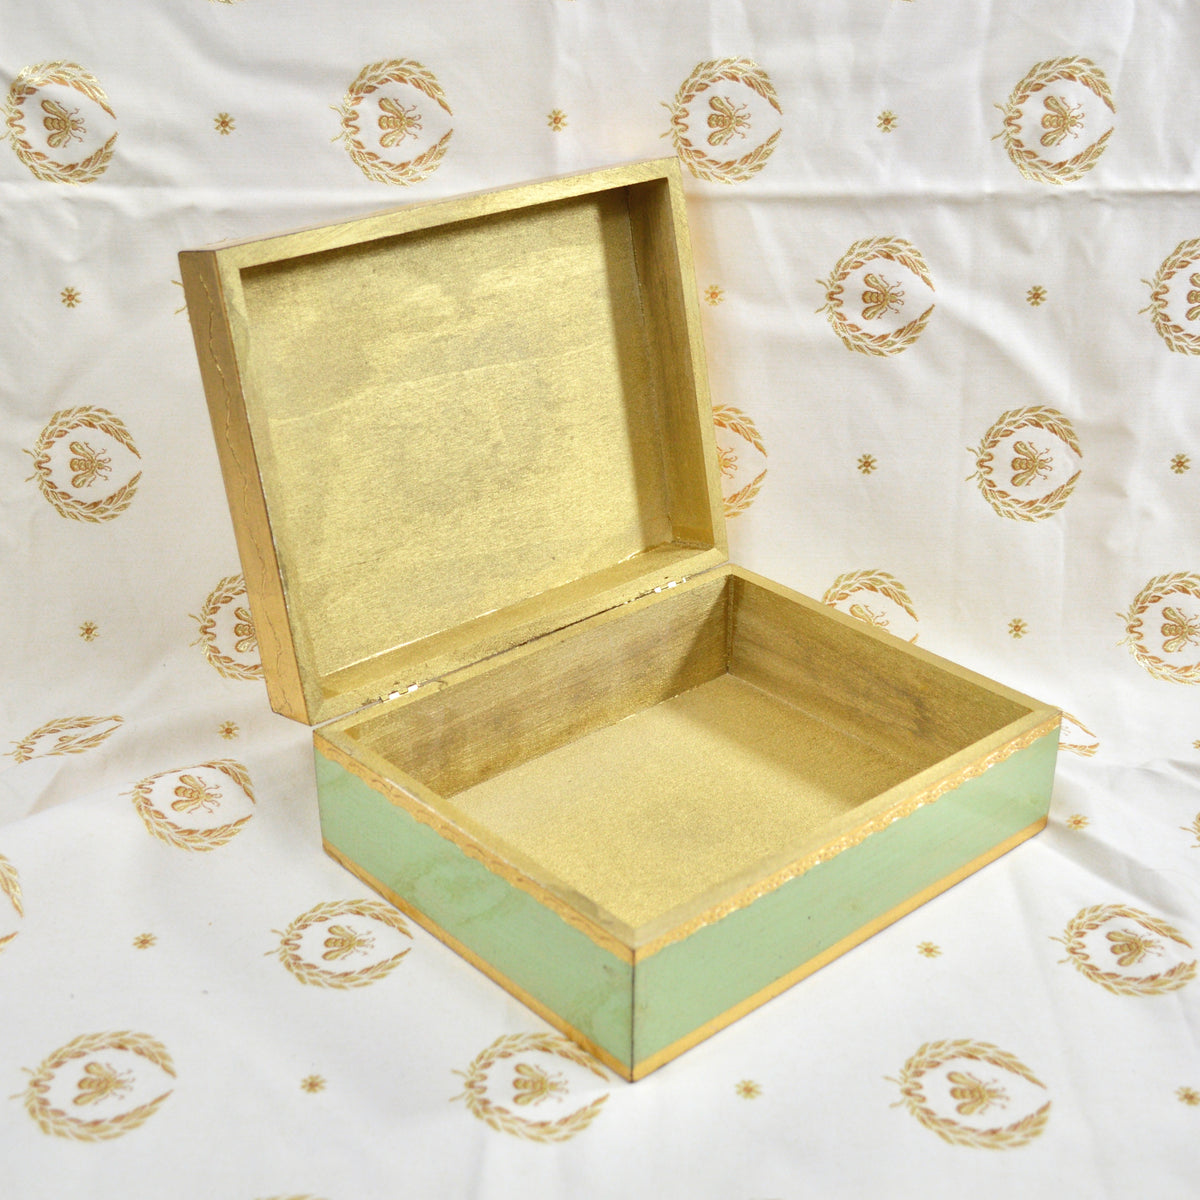 Florentine Gilded Wood Storage Box, Rectangle, Made In Italy - My Italian Decor